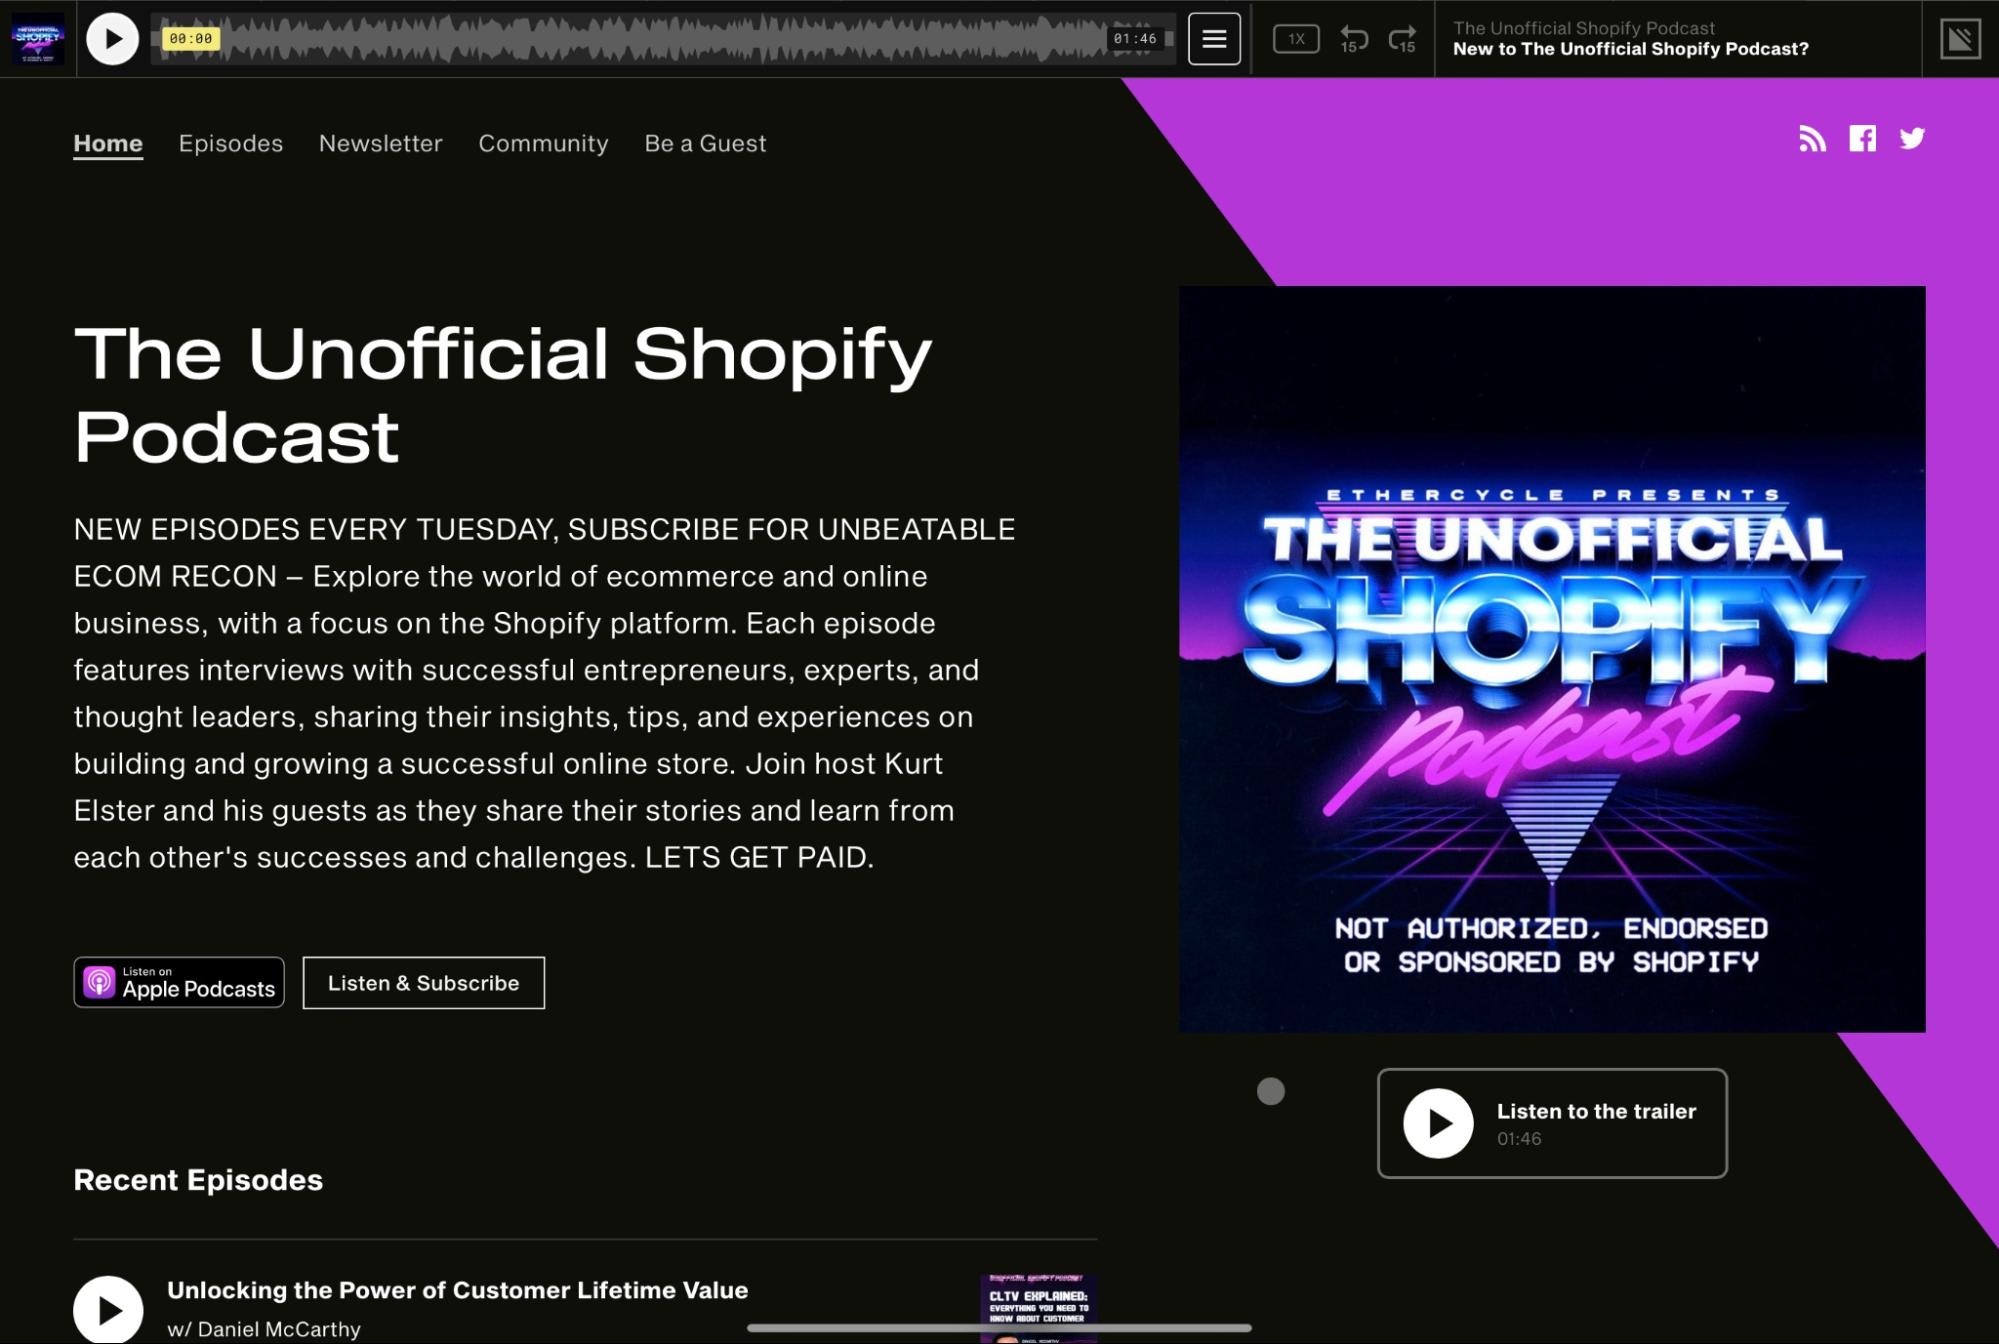 The Unofficial Shopify podcast copy